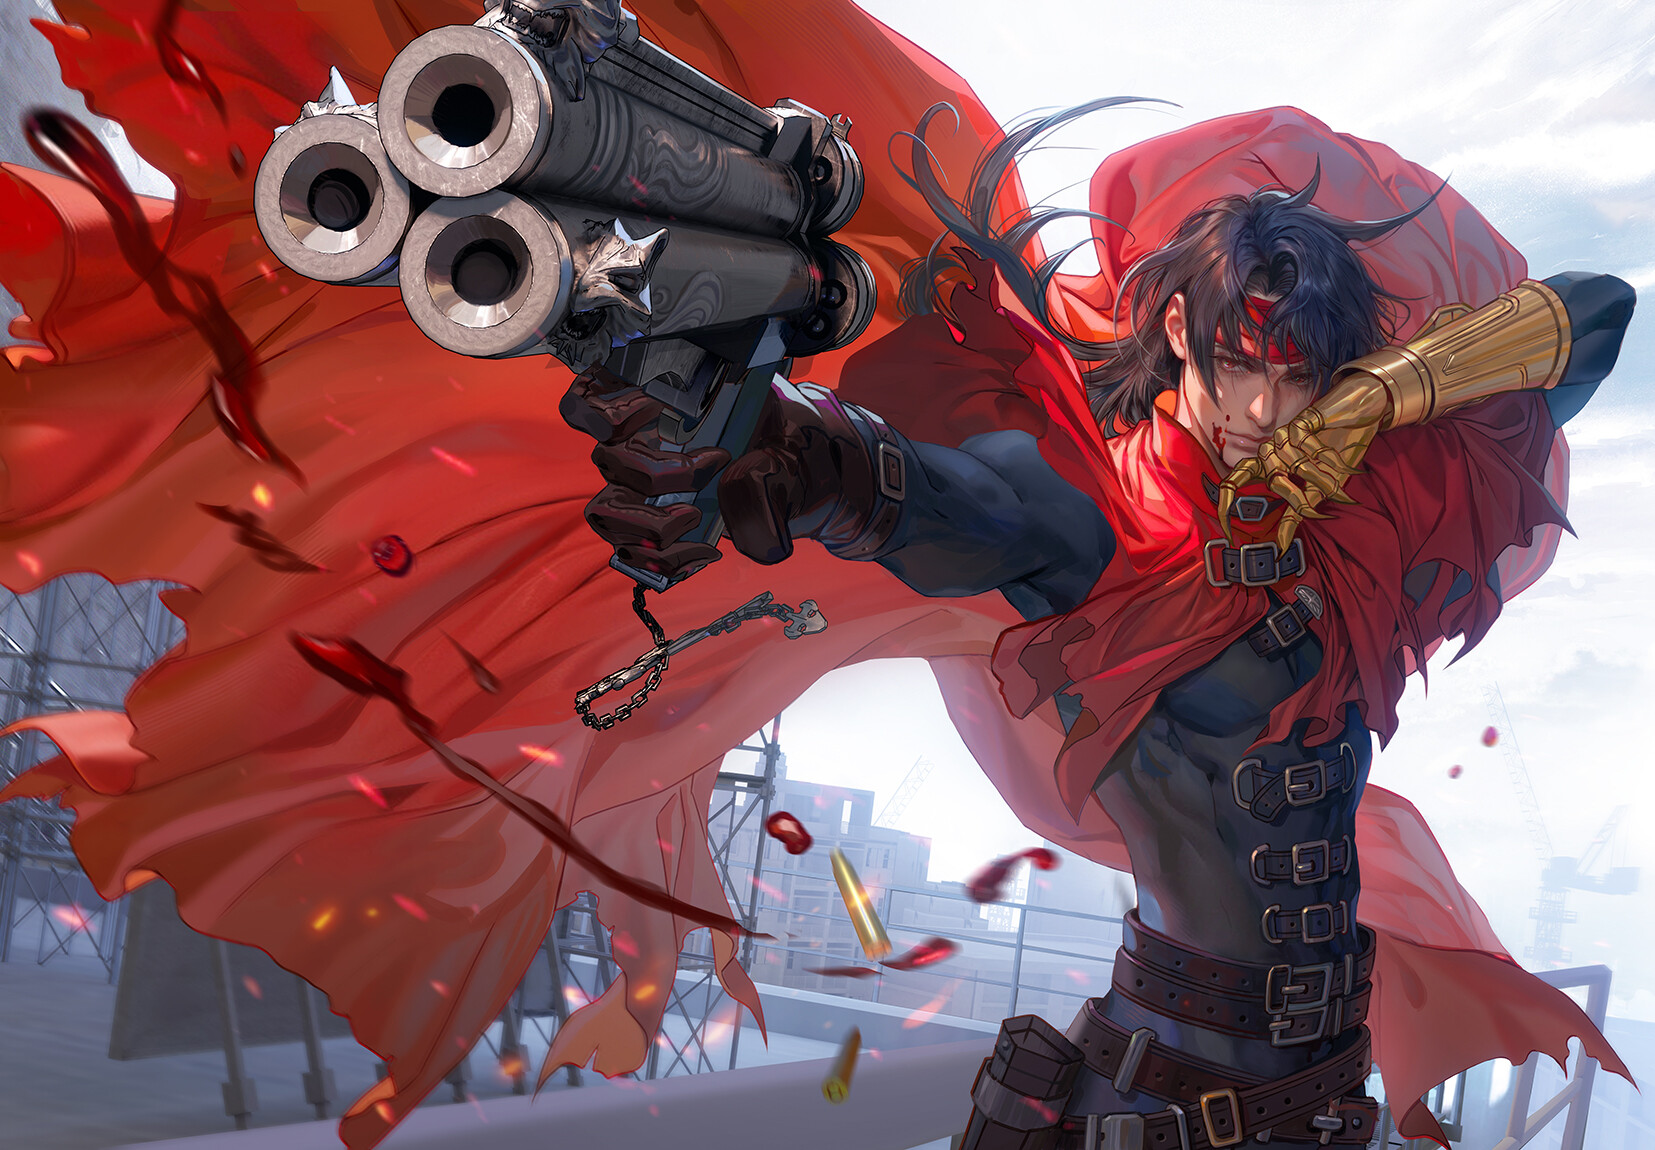 General 1655x1150 Fan Yang drawing gun Vincent Valentine shooting Final Fantasy Final Fantasy VII: Remake Final Fantasy VII: Rebirth Final Fantasy VII cape boys with guns wind hair blowing in the wind sky blood aiming closed mouth headband ammunition long hair